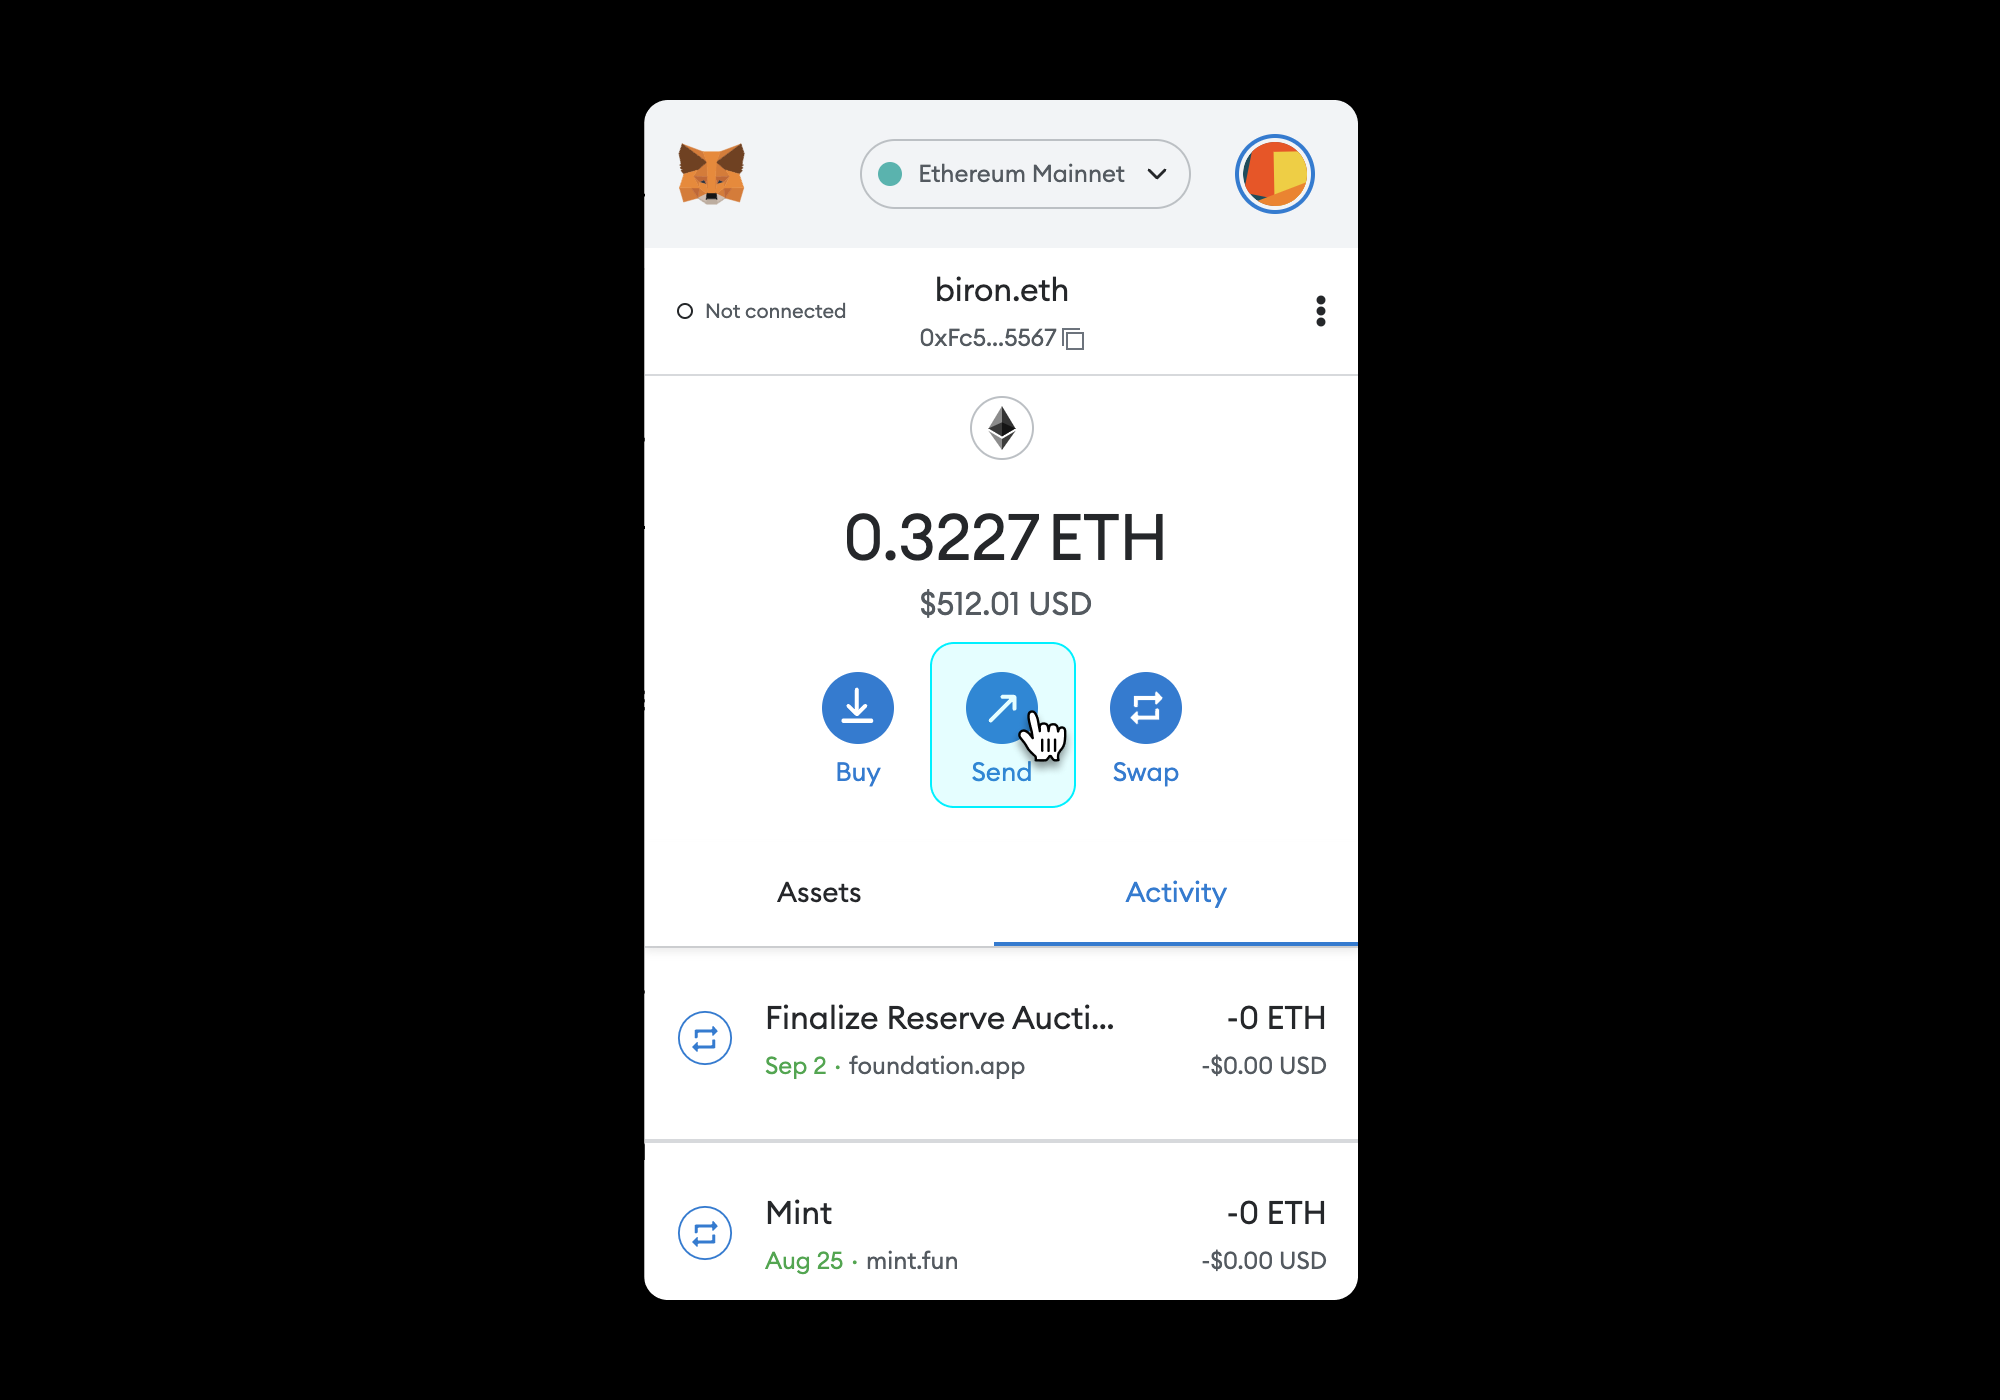 By following these simple steps, you can easily cash out your Ethereum on Coinbase and enjoy the profits of your investment. Coinbase's user-friendly interface and reliable reputation make it a popular choice for cryptocurrency enthusiasts looking to convert their digital assets into traditional currency.